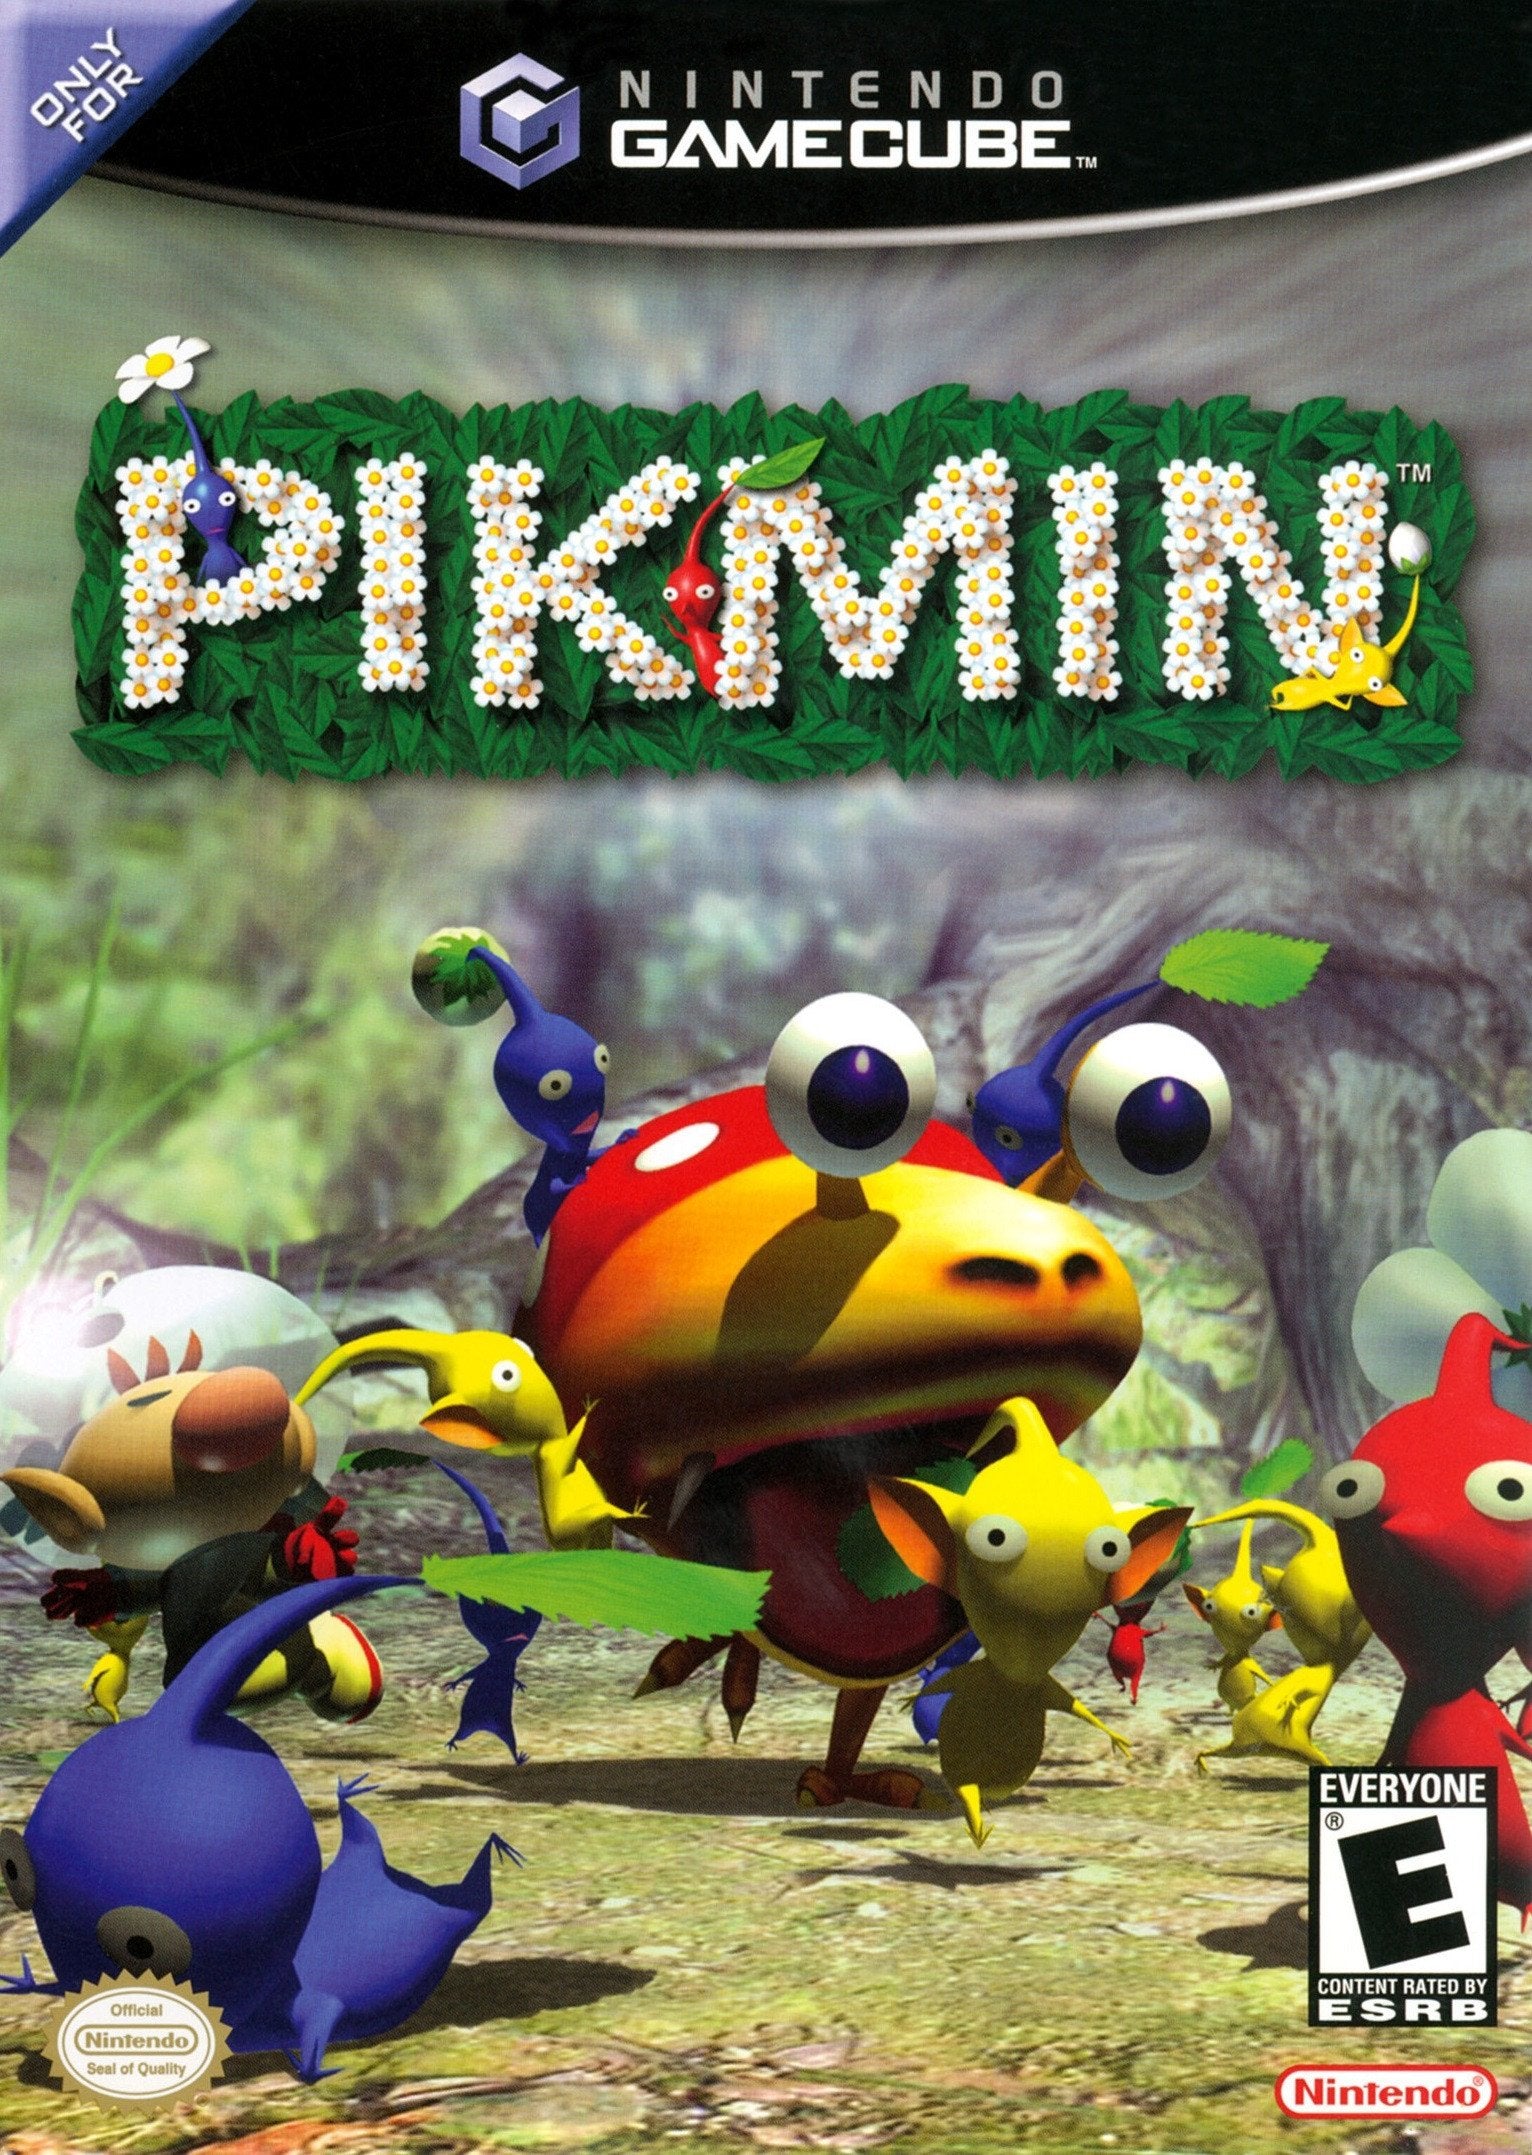 J2Games.com | Pikmin (Gamecube) (Pre-Played - Game Only).